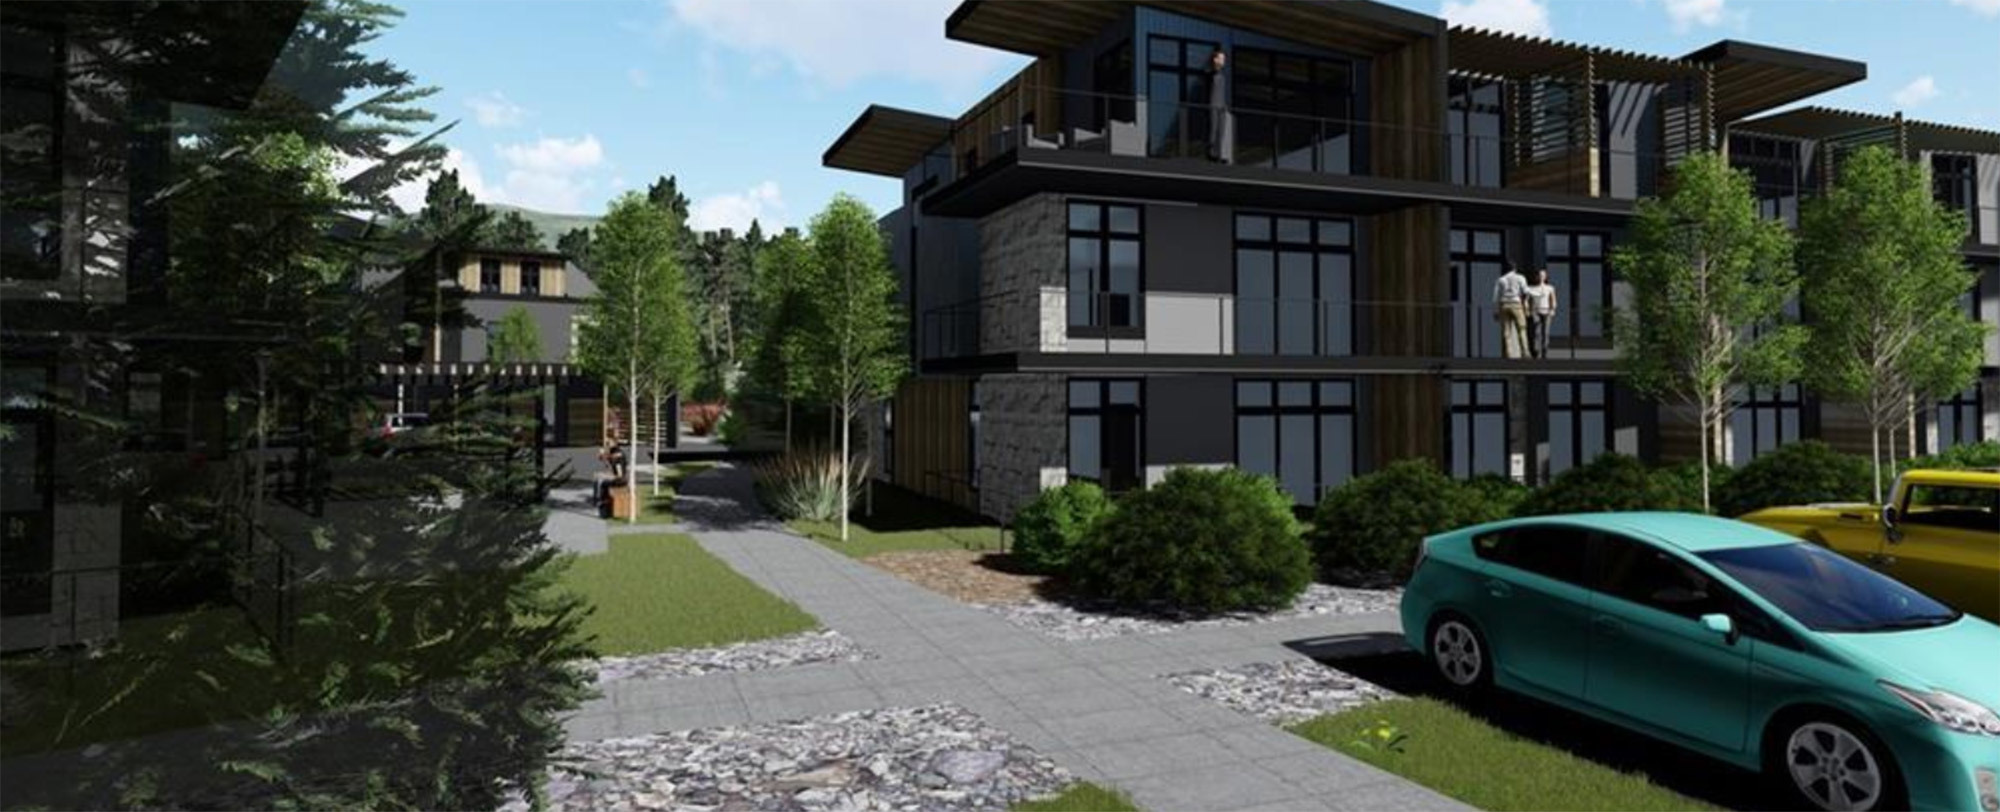 River West Condos in the core residential neighborhood of Silverthorne